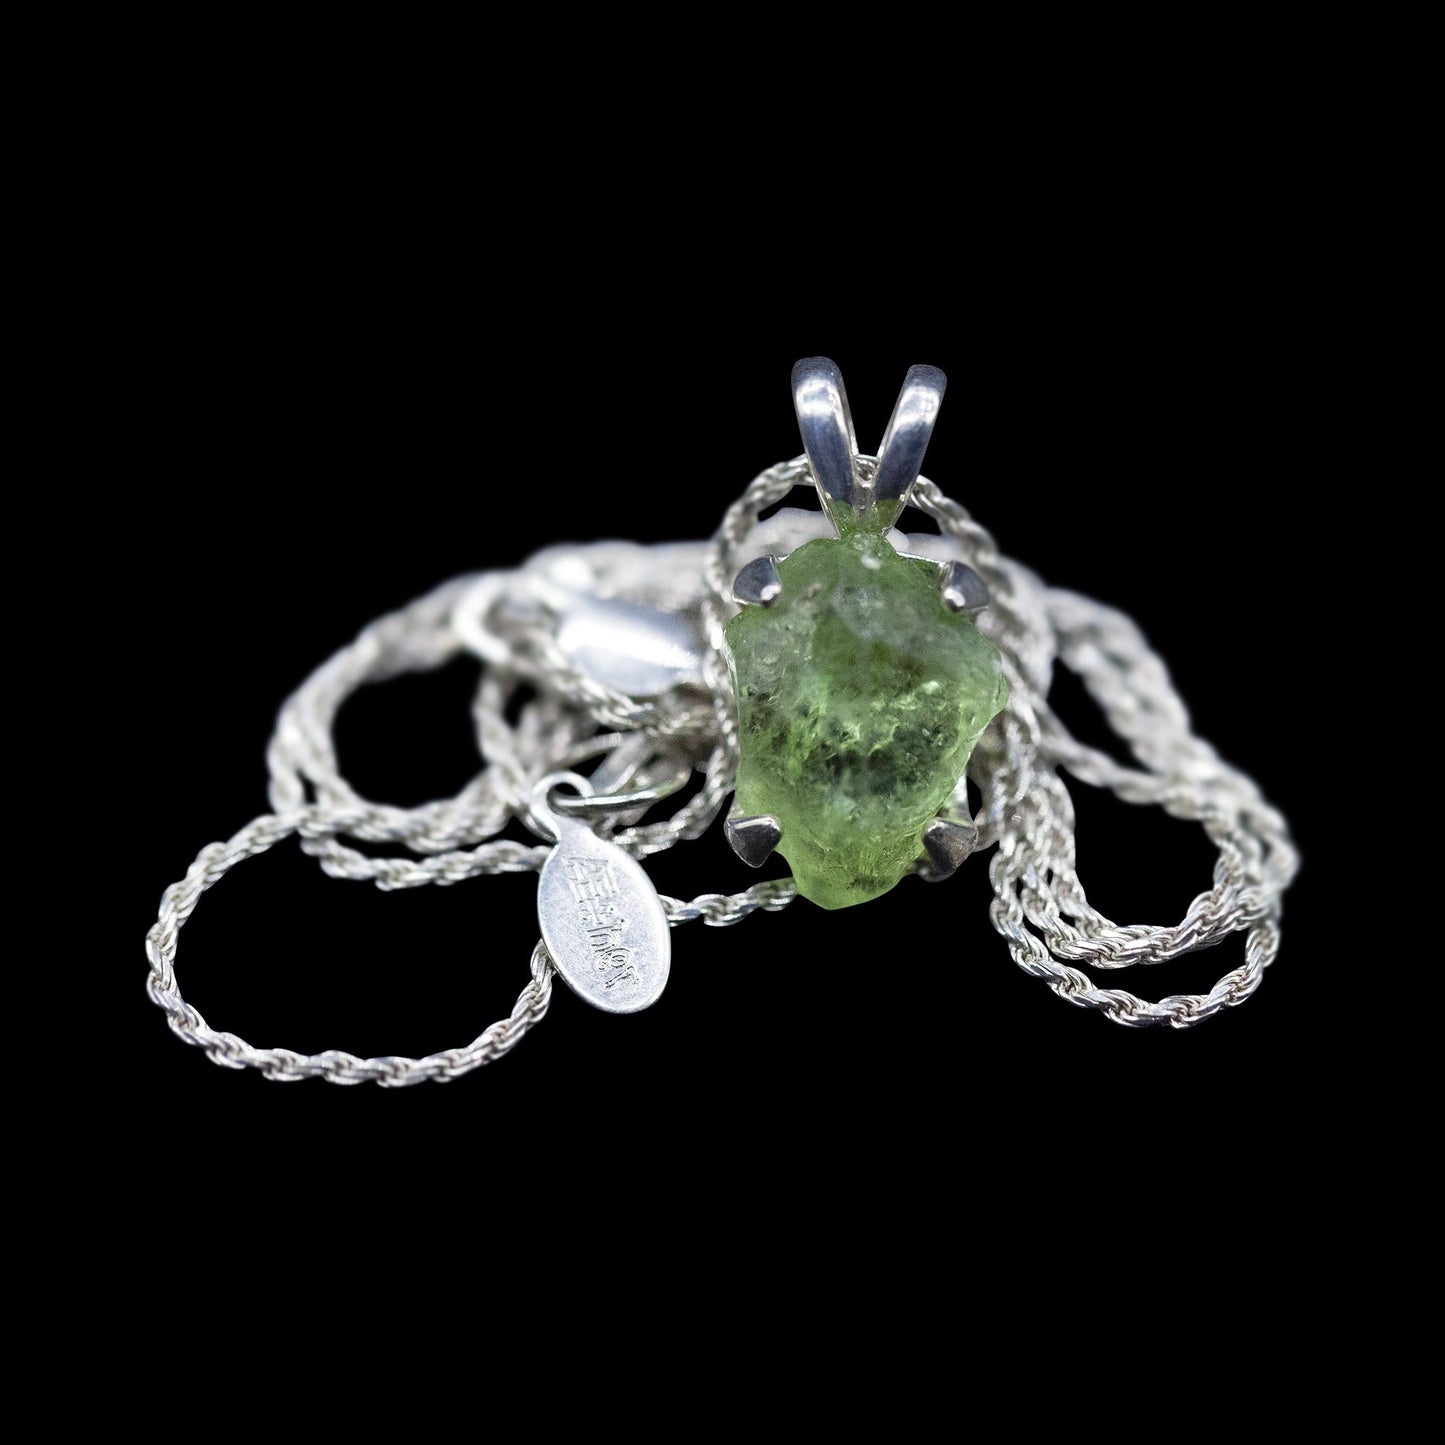 Raw Peridot Solitaire on Sterling Silver Rope